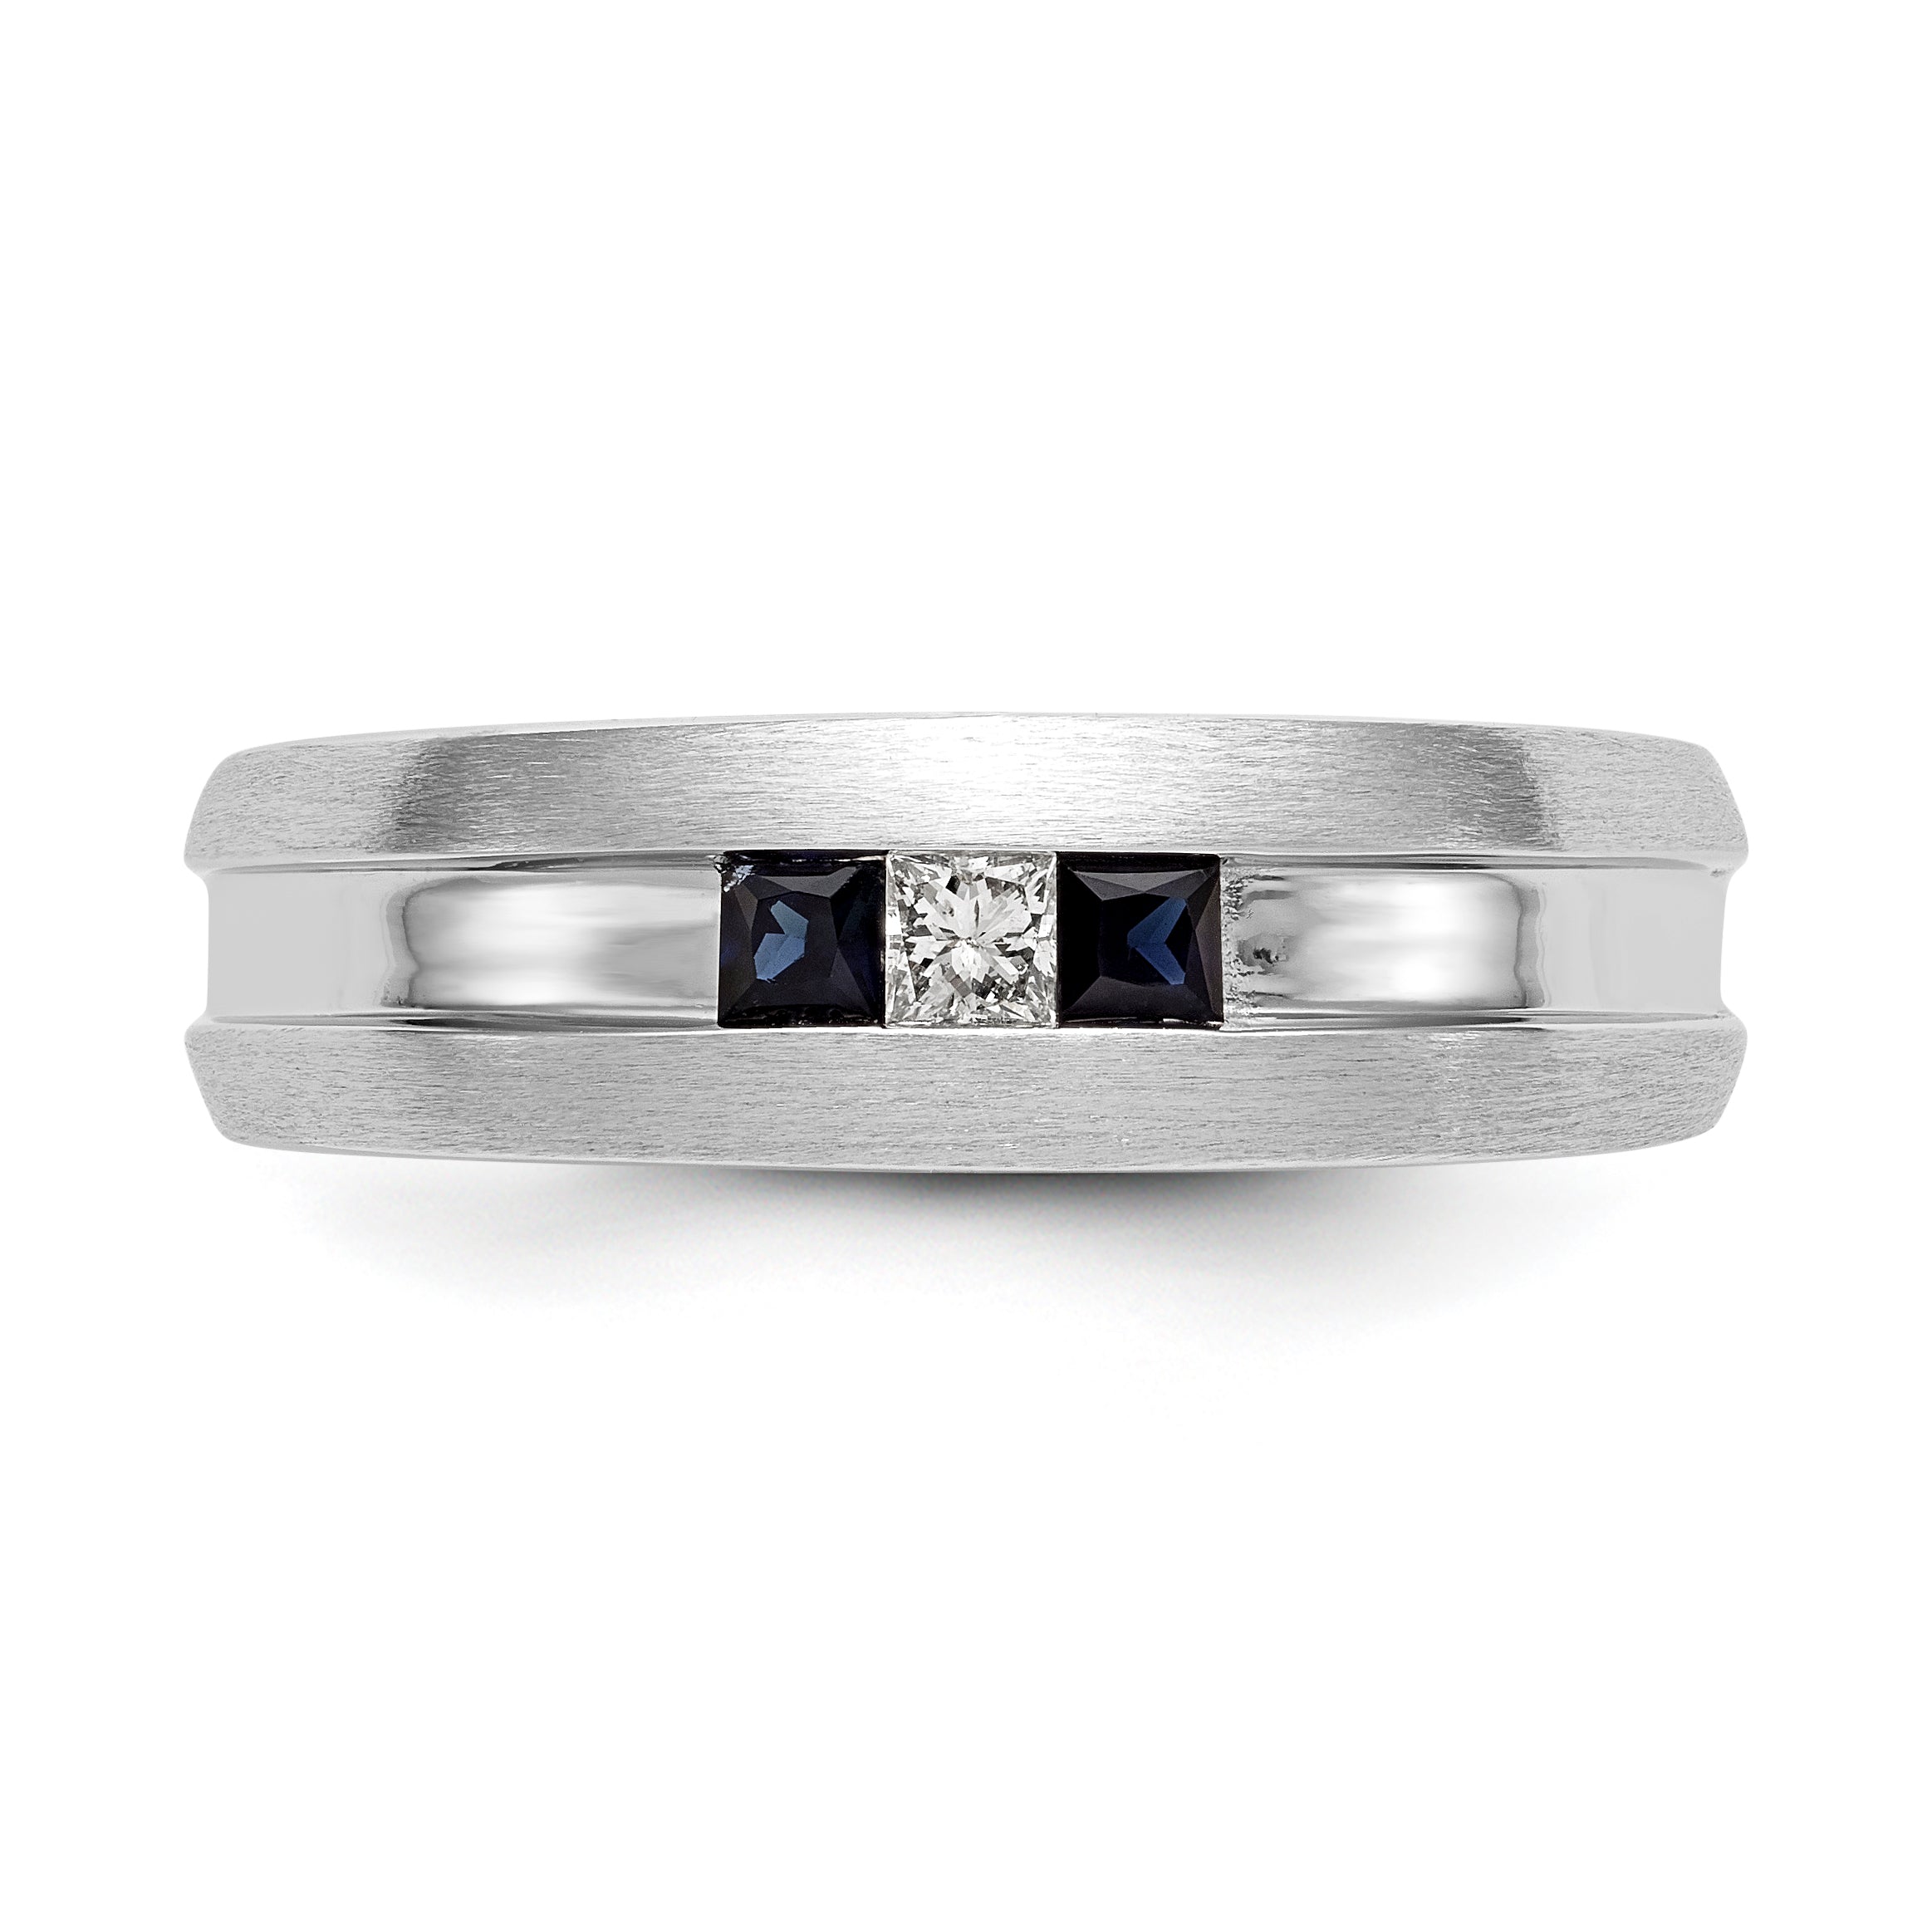 14K White Gold 1/10 carat Diamond and Sapphire Complete Men's Channel Band